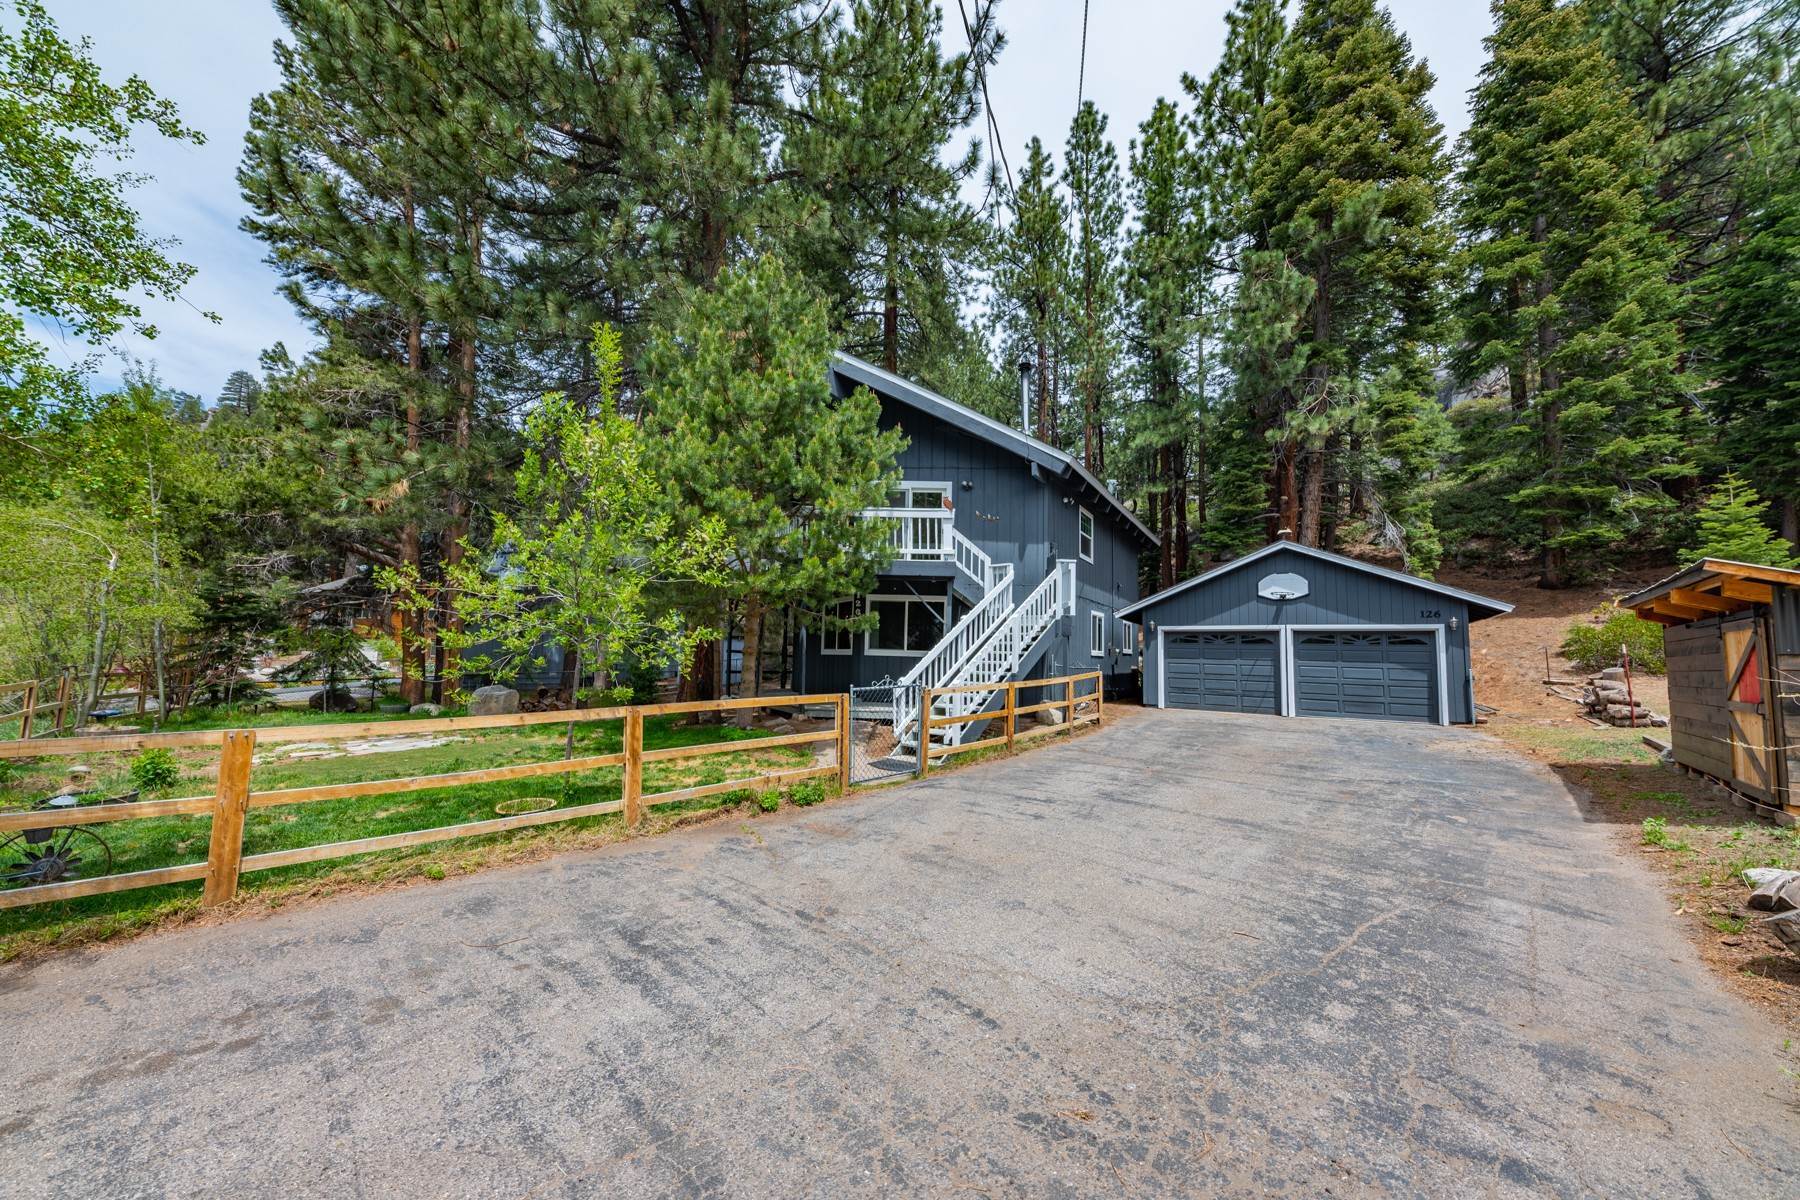 Single Family Homes for Active at Distinctive Tahoe Chalet 126 Aspen Way Stateline, Nevada 89449 United States